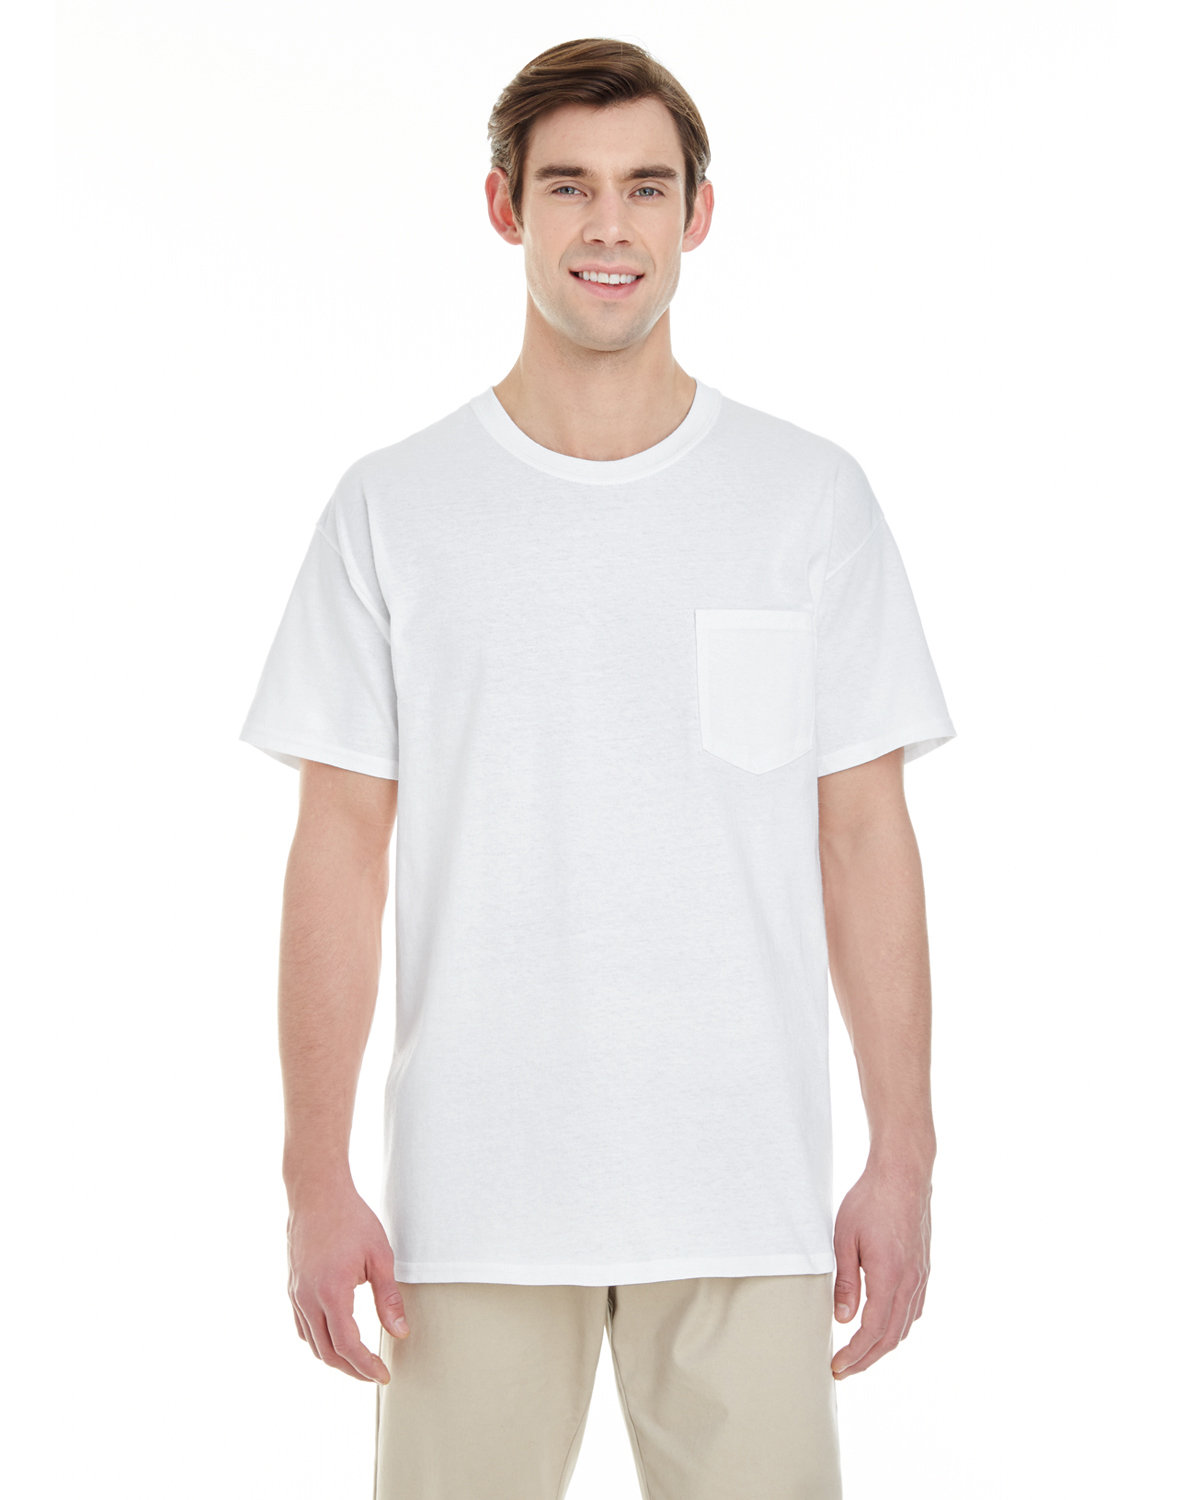 Gildan Poly Cotton Blend T-Shirt, White, Large. (Pack of 10)